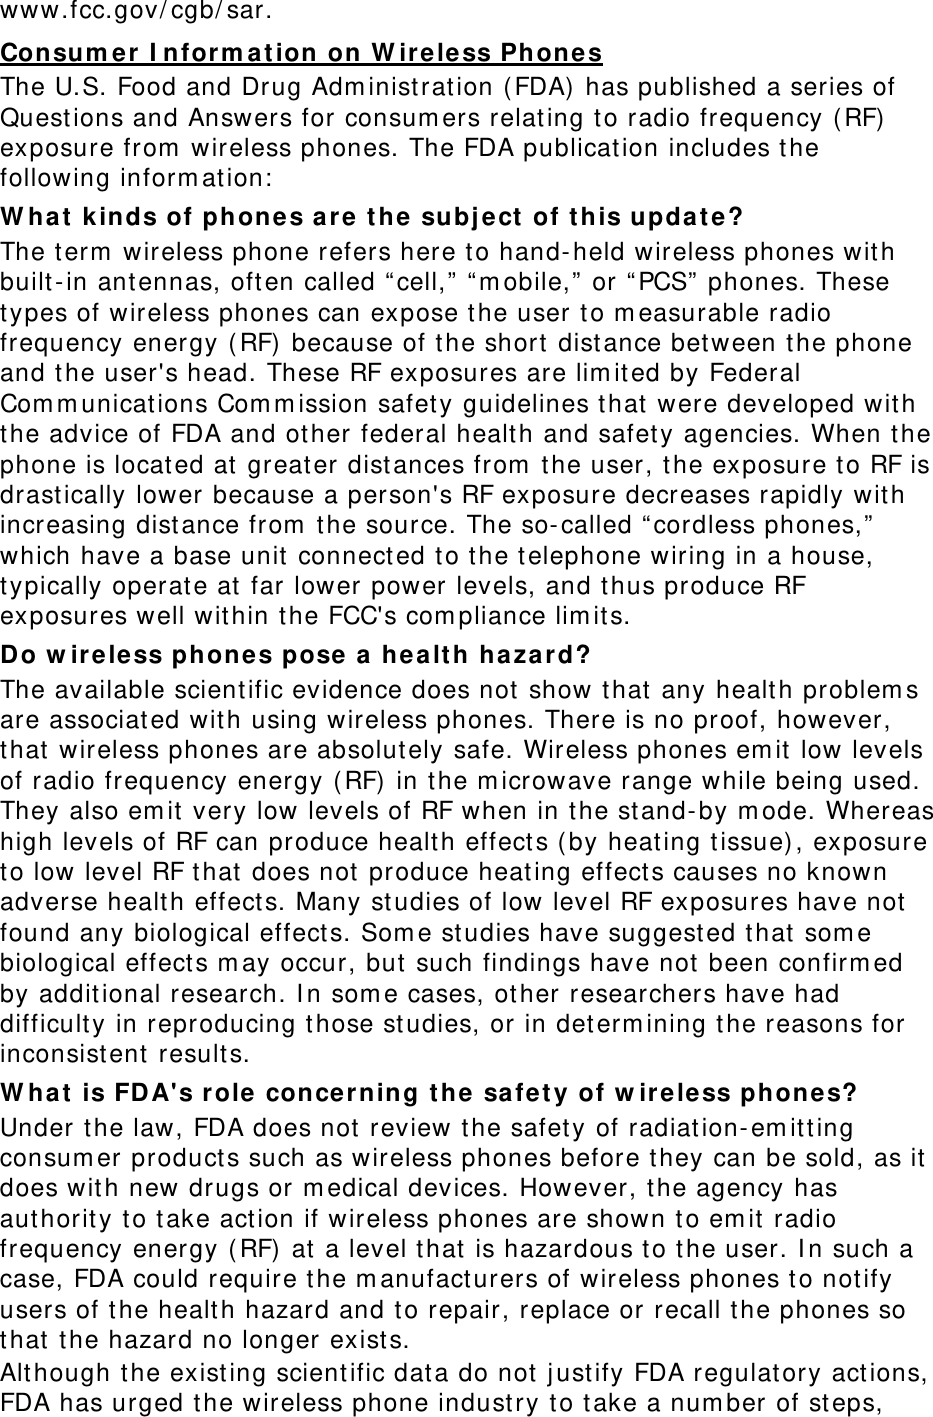 www.fcc.gov/ cgb/ sar. Consum er I nform at ion on W ire less Phon e s The U.S. Food and Drug Adm inistration ( FDA) has published a series of Quest ions and Answers for consum ers relating to radio frequency ( RF)  exposure from  wireless phones. The FDA publication includes the following inform at ion:  W hat  k inds of phone s ar e  t he subj ect  of t his upda t e? The t erm  wireless phone refers here to hand- held wireless phones with built- in antennas, oft en called “ cell,”  “ m obile,”  or “ PCS”  phones. These types of wireless phones can expose t he user t o m easurable radio frequency energy ( RF)  because of t he short  dist ance bet ween t he phone and the user&apos;s head. These RF exposures are lim it ed by Federal Com m unications Com m ission safety guidelines that  were developed wit h the advice of FDA and other federal healt h and safety agencies. When t he phone is located at greater distances from  t he user, t he exposure to RF is drast ically lower because a person&apos;s RF exposure decreases rapidly with increasing distance from  the source. The so-called “ cordless phones,”  which have a base unit connect ed t o t he telephone wiring in a house, typically operat e at  far lower power levels, and thus produce RF exposures well within the FCC&apos;s com pliance lim it s. Do w ir e le ss phones pose  a  he a lt h ha zard? The available scient ific evidence does not show that  any health problem s are associated with using wireless phones. There is no proof, however, that  wireless phones are absolut ely safe. Wireless phones em it  low levels of radio frequency energy ( RF)  in the m icrowave range while being used. They also em it  very low levels of RF when in t he st and- by m ode. Whereas high levels of RF can produce health effect s ( by heating tissue) , exposure to low level RF t hat  does not produce heat ing effect s causes no known adverse health effect s. Many studies of low level RF exposures have not found any biological effect s. Som e studies have suggest ed that  som e biological effect s m ay occur, but such findings have not  been confirm ed by additional research. I n som e cases, other researchers have had difficulty in reproducing those studies, or in determ ining t he reasons for inconsist ent  results. W hat  is FD A&apos;s role  concerning t he  safe t y of w ir e le ss phones? Under t he law, FDA does not review t he safet y of radiation- em itt ing consum er product s such as wireless phones before they can be sold, as it does wit h new drugs or m edical devices. However, t he agency has aut hority t o take act ion if wireless phones are shown t o em it radio frequency energy ( RF)  at a level t hat is hazardous t o t he user. I n such a case, FDA could require the m anufact urers of wireless phones t o not ify users of t he health hazard and to repair, replace or recall t he phones so that  t he hazard no longer exist s. Alt hough t he existing scient ific data do not j ust ify FDA regulat ory act ions, FDA has urged t he wireless phone industry to t ake a num ber of steps, 